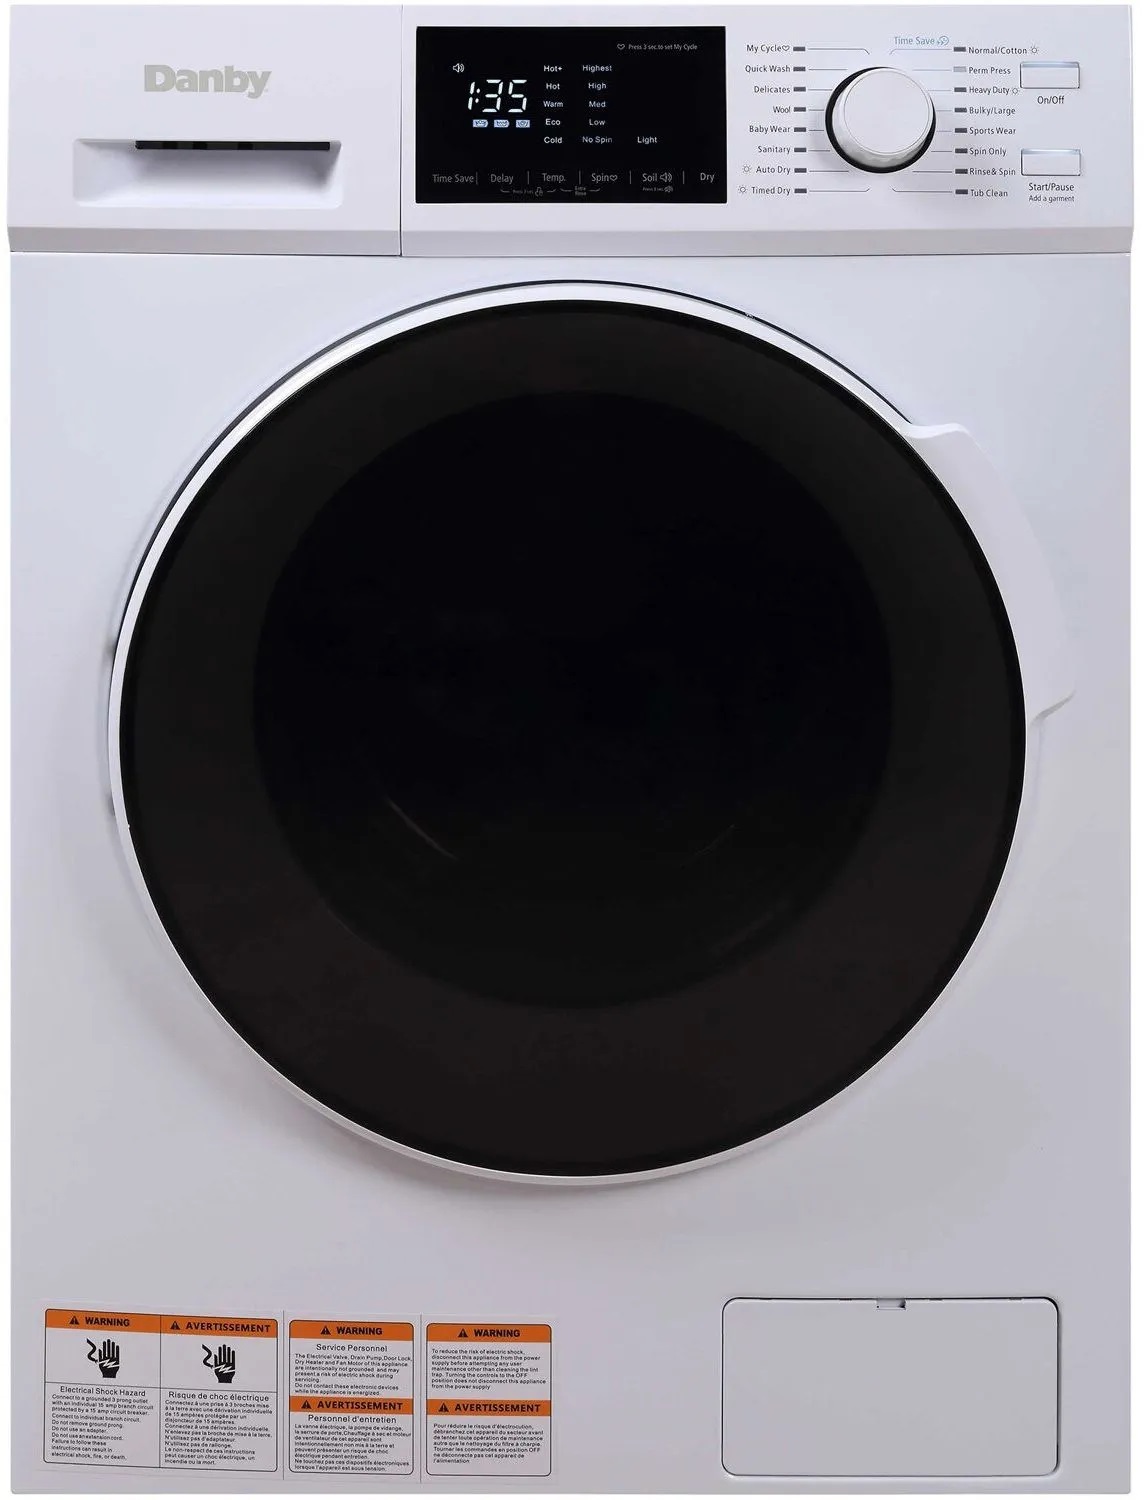 Front view of Danby DWM120WDB washer dryer combo with heated pump